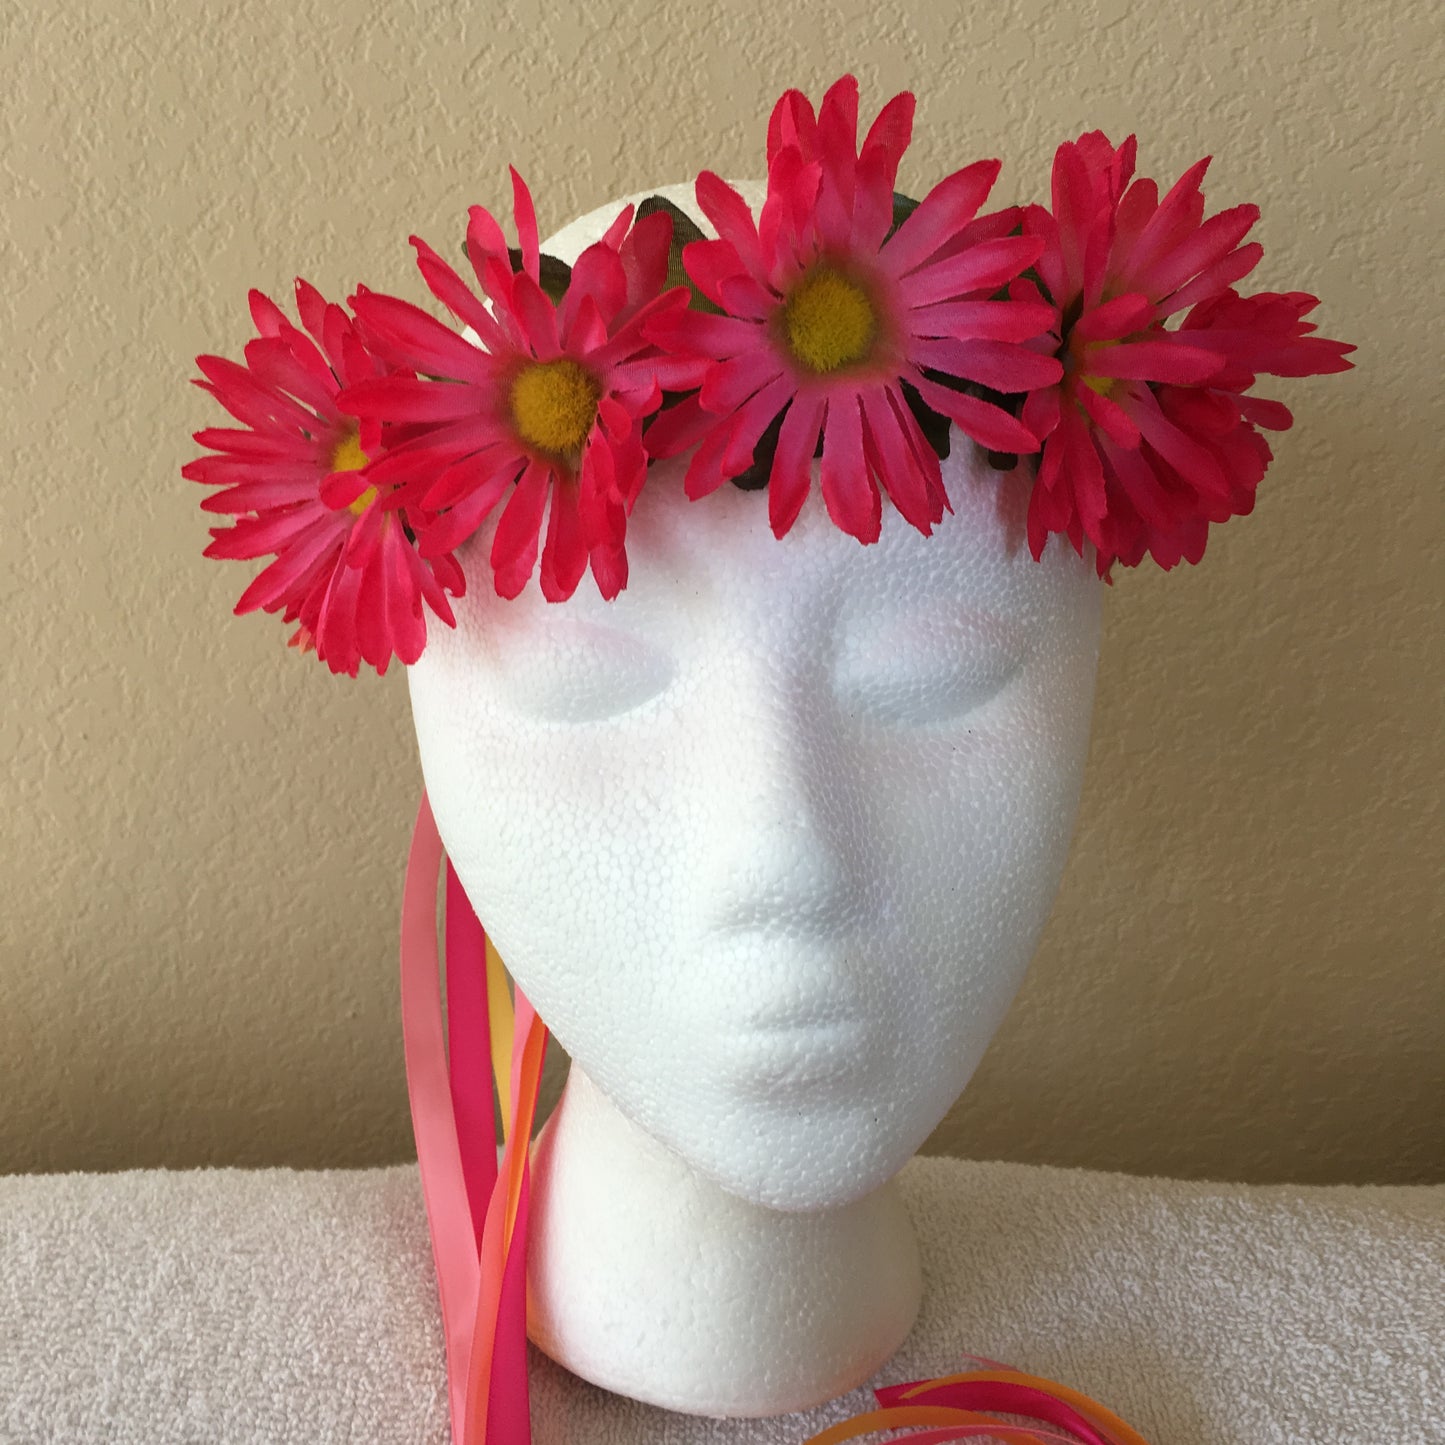 Small Wreath - Hot pink daisies